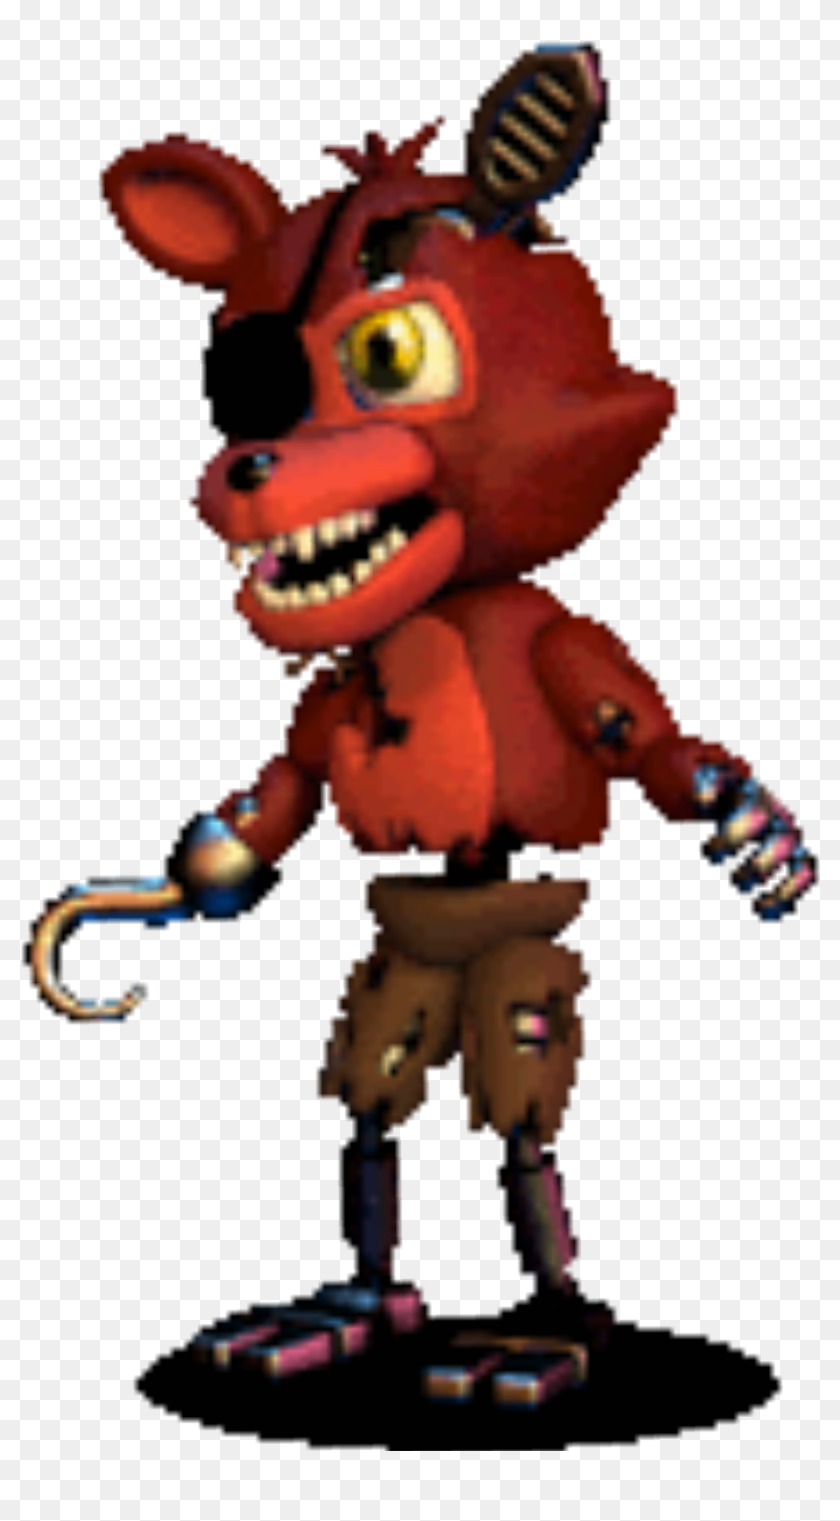 Fnaf World Five Nights At Freddy S Gif Game Tenor Fnaf Adventure Withered Foxy Hd Png Download 1773x1773 Pngfind